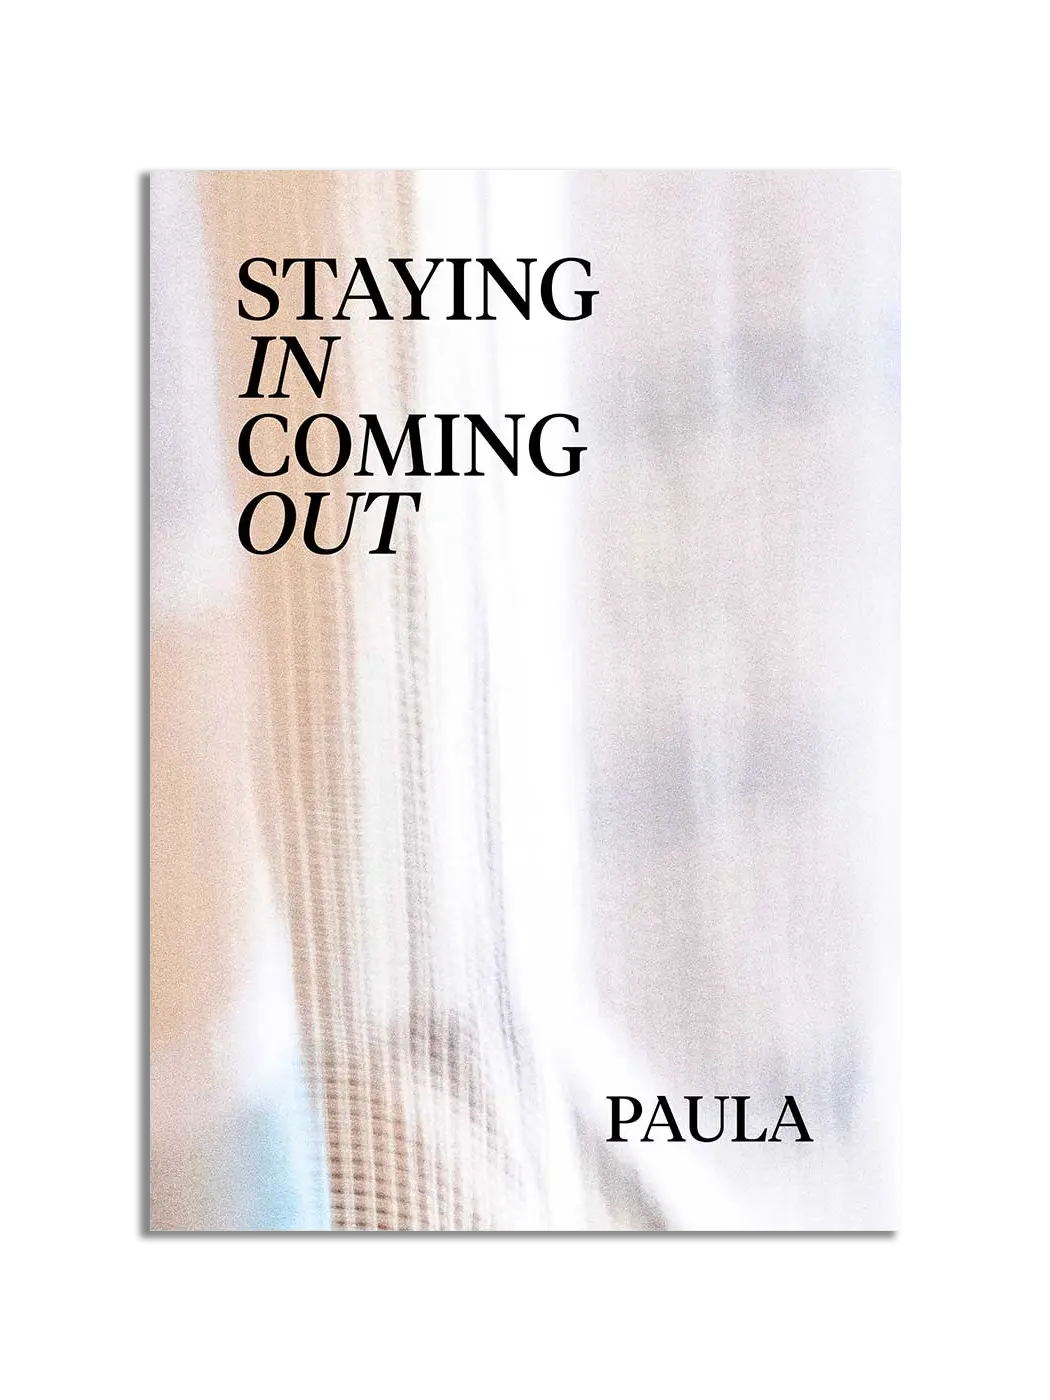 Staying in coming out // paula